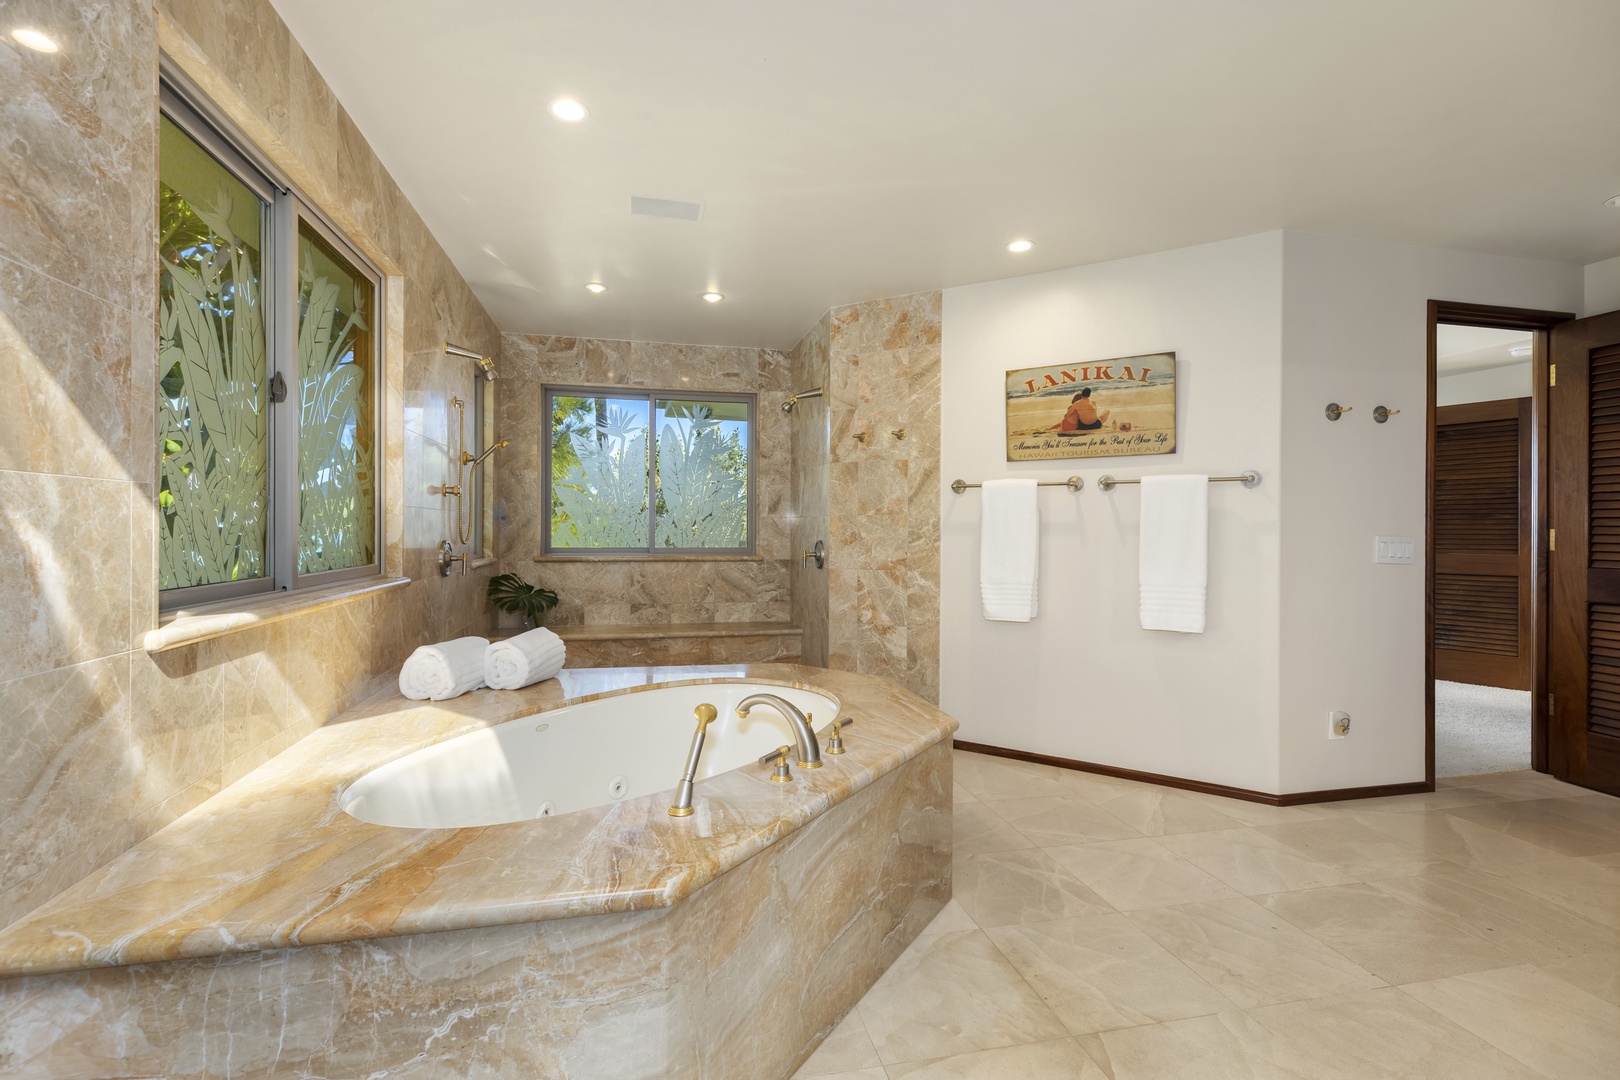 Kailua Vacation Rentals, Mokulua Sunrise - The Primary Bedroom full ensuite bath boasts a jacuzzi tub and walk-in shower with 2 shower heads and a handheld wand